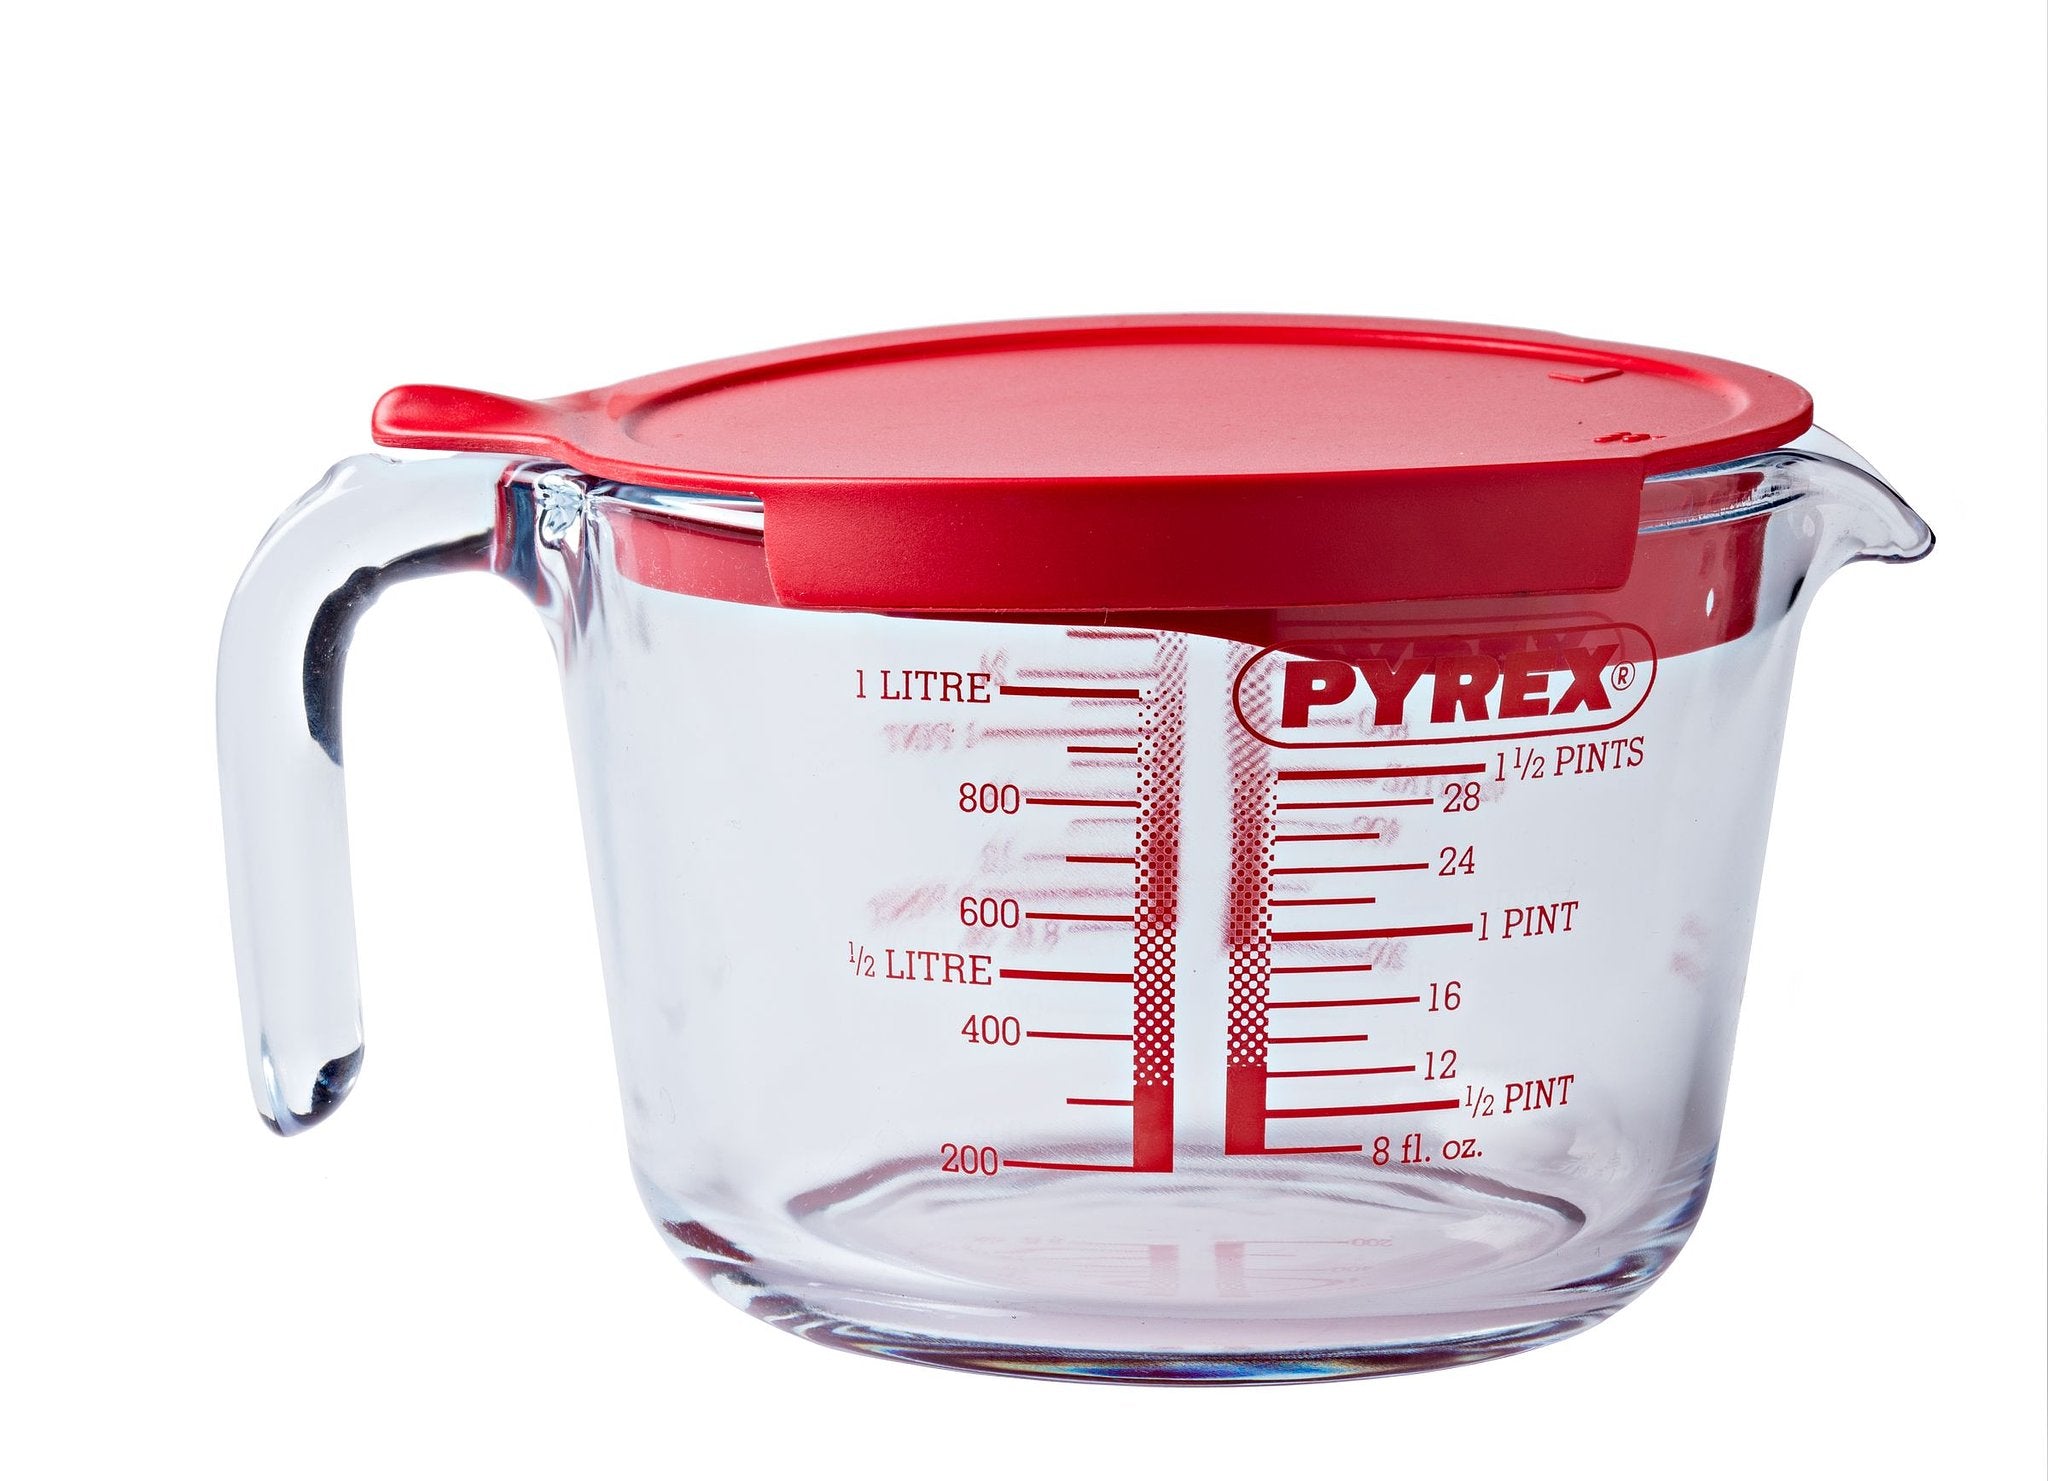 Pyrex Classic Prepware Measuring Cup and Lid 1 liter